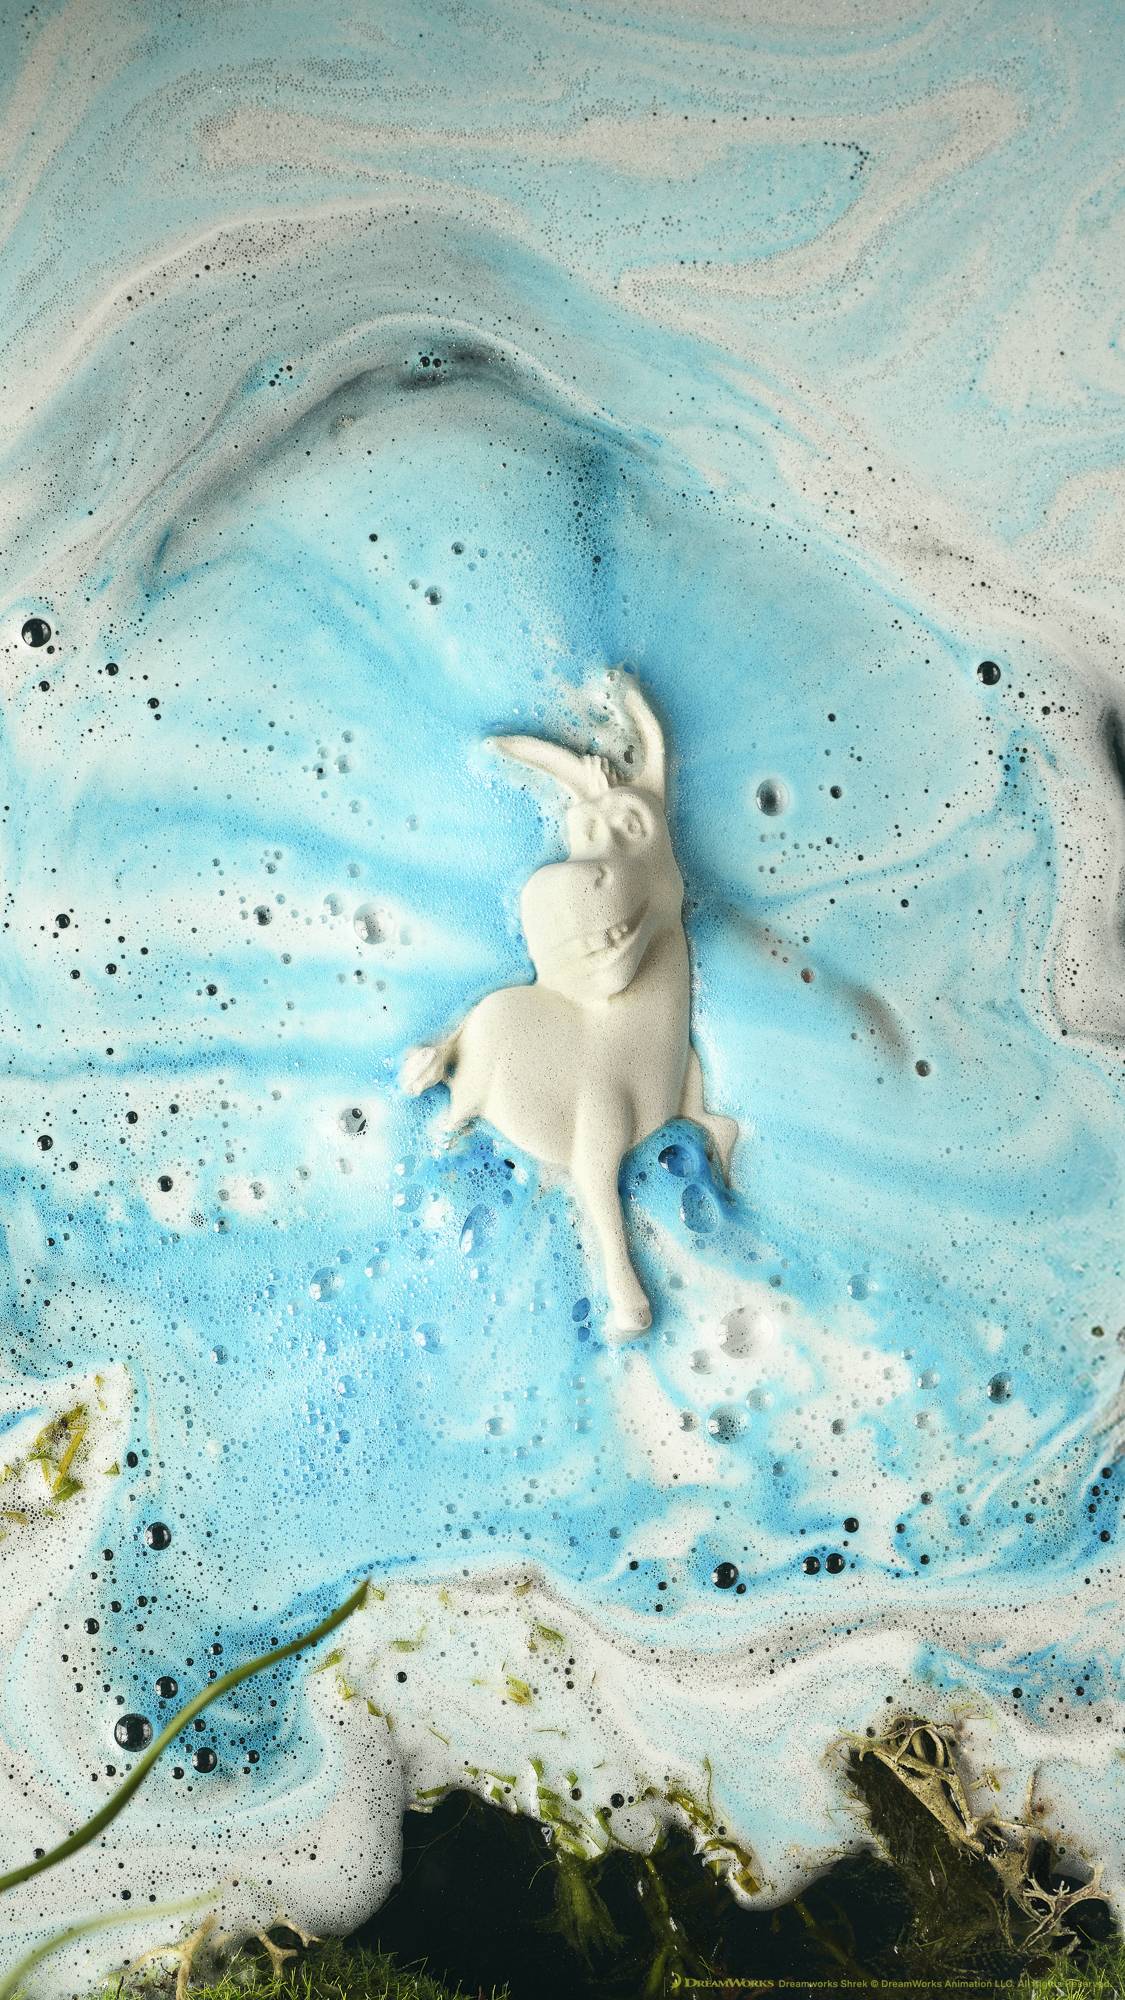 The Donkey bath bomb sits on the surface of the water with the smiling face pointing towards the camera. There are thick, bubbly waves of white and blue foam terminating from the bath bomb. 